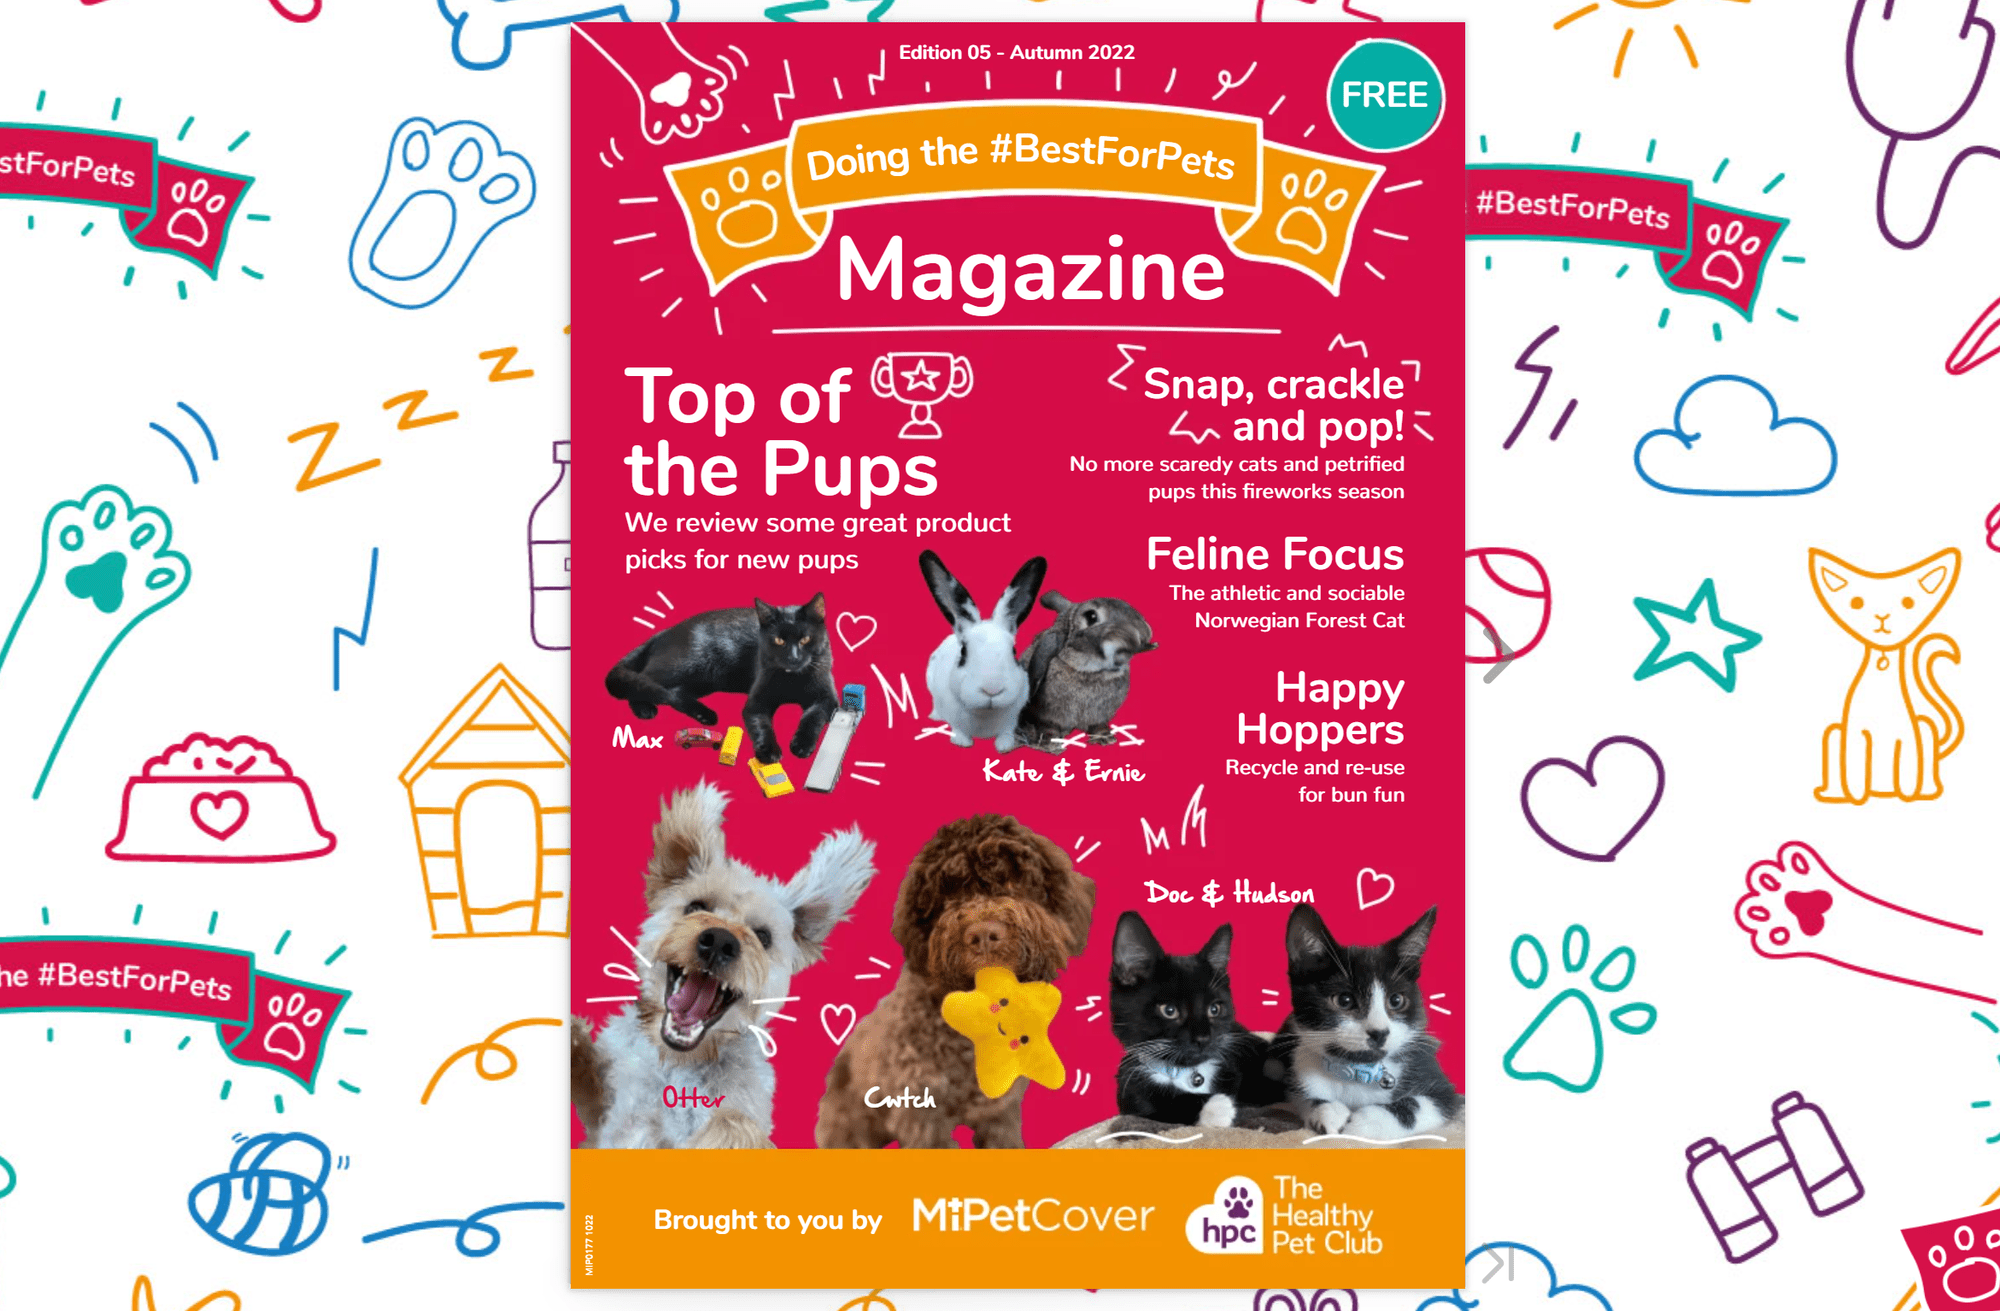 #BestForPets Magazine – Autumn 2022 issue out now!